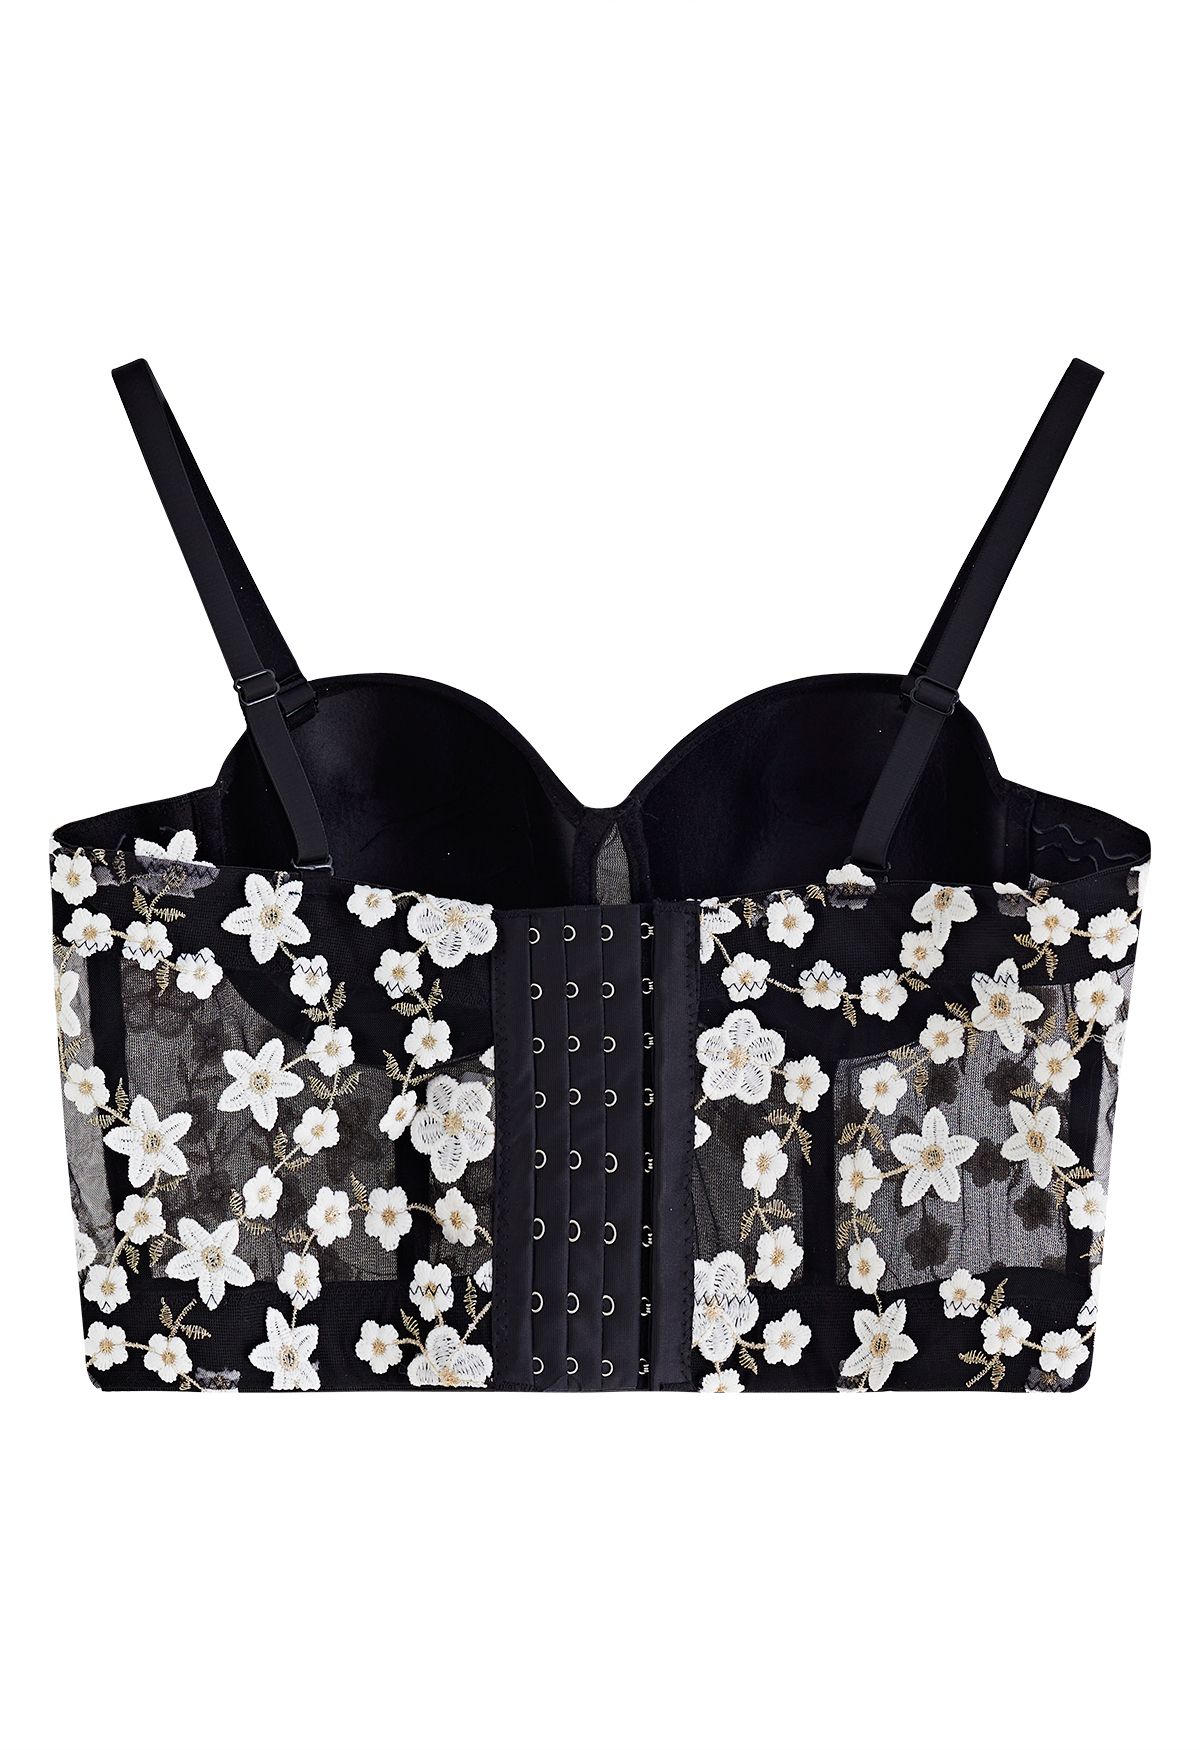 Embroidered Floret Corset Bustier Top in Black